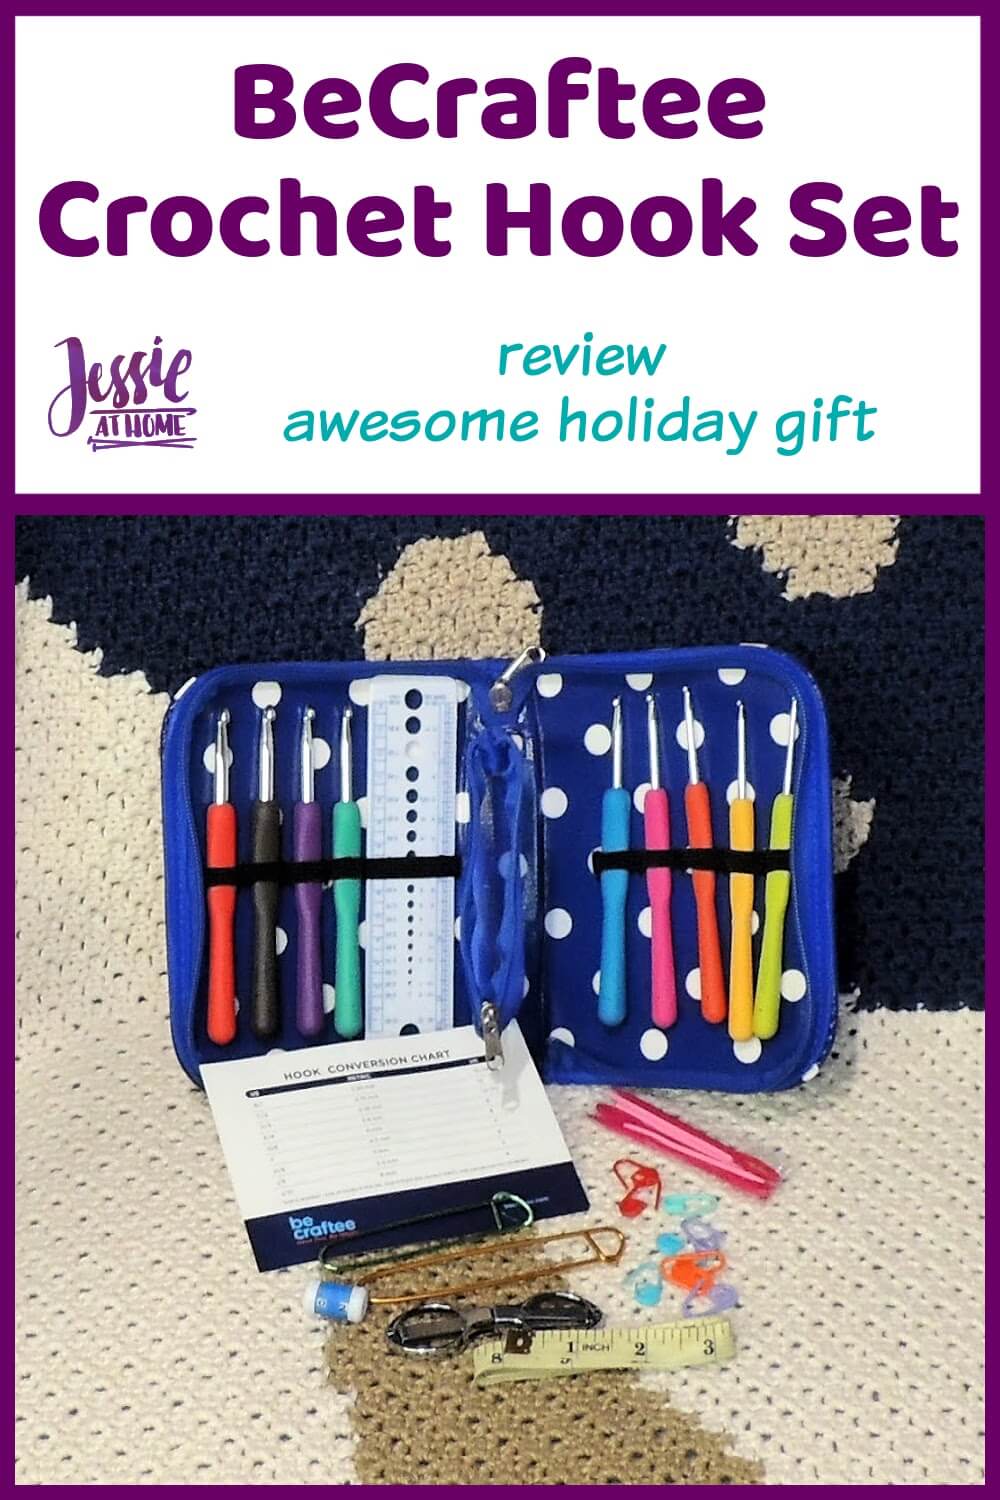 BeCraftee Crochet Hook Set - Awesome Holiday Gift! - Jessie At Home